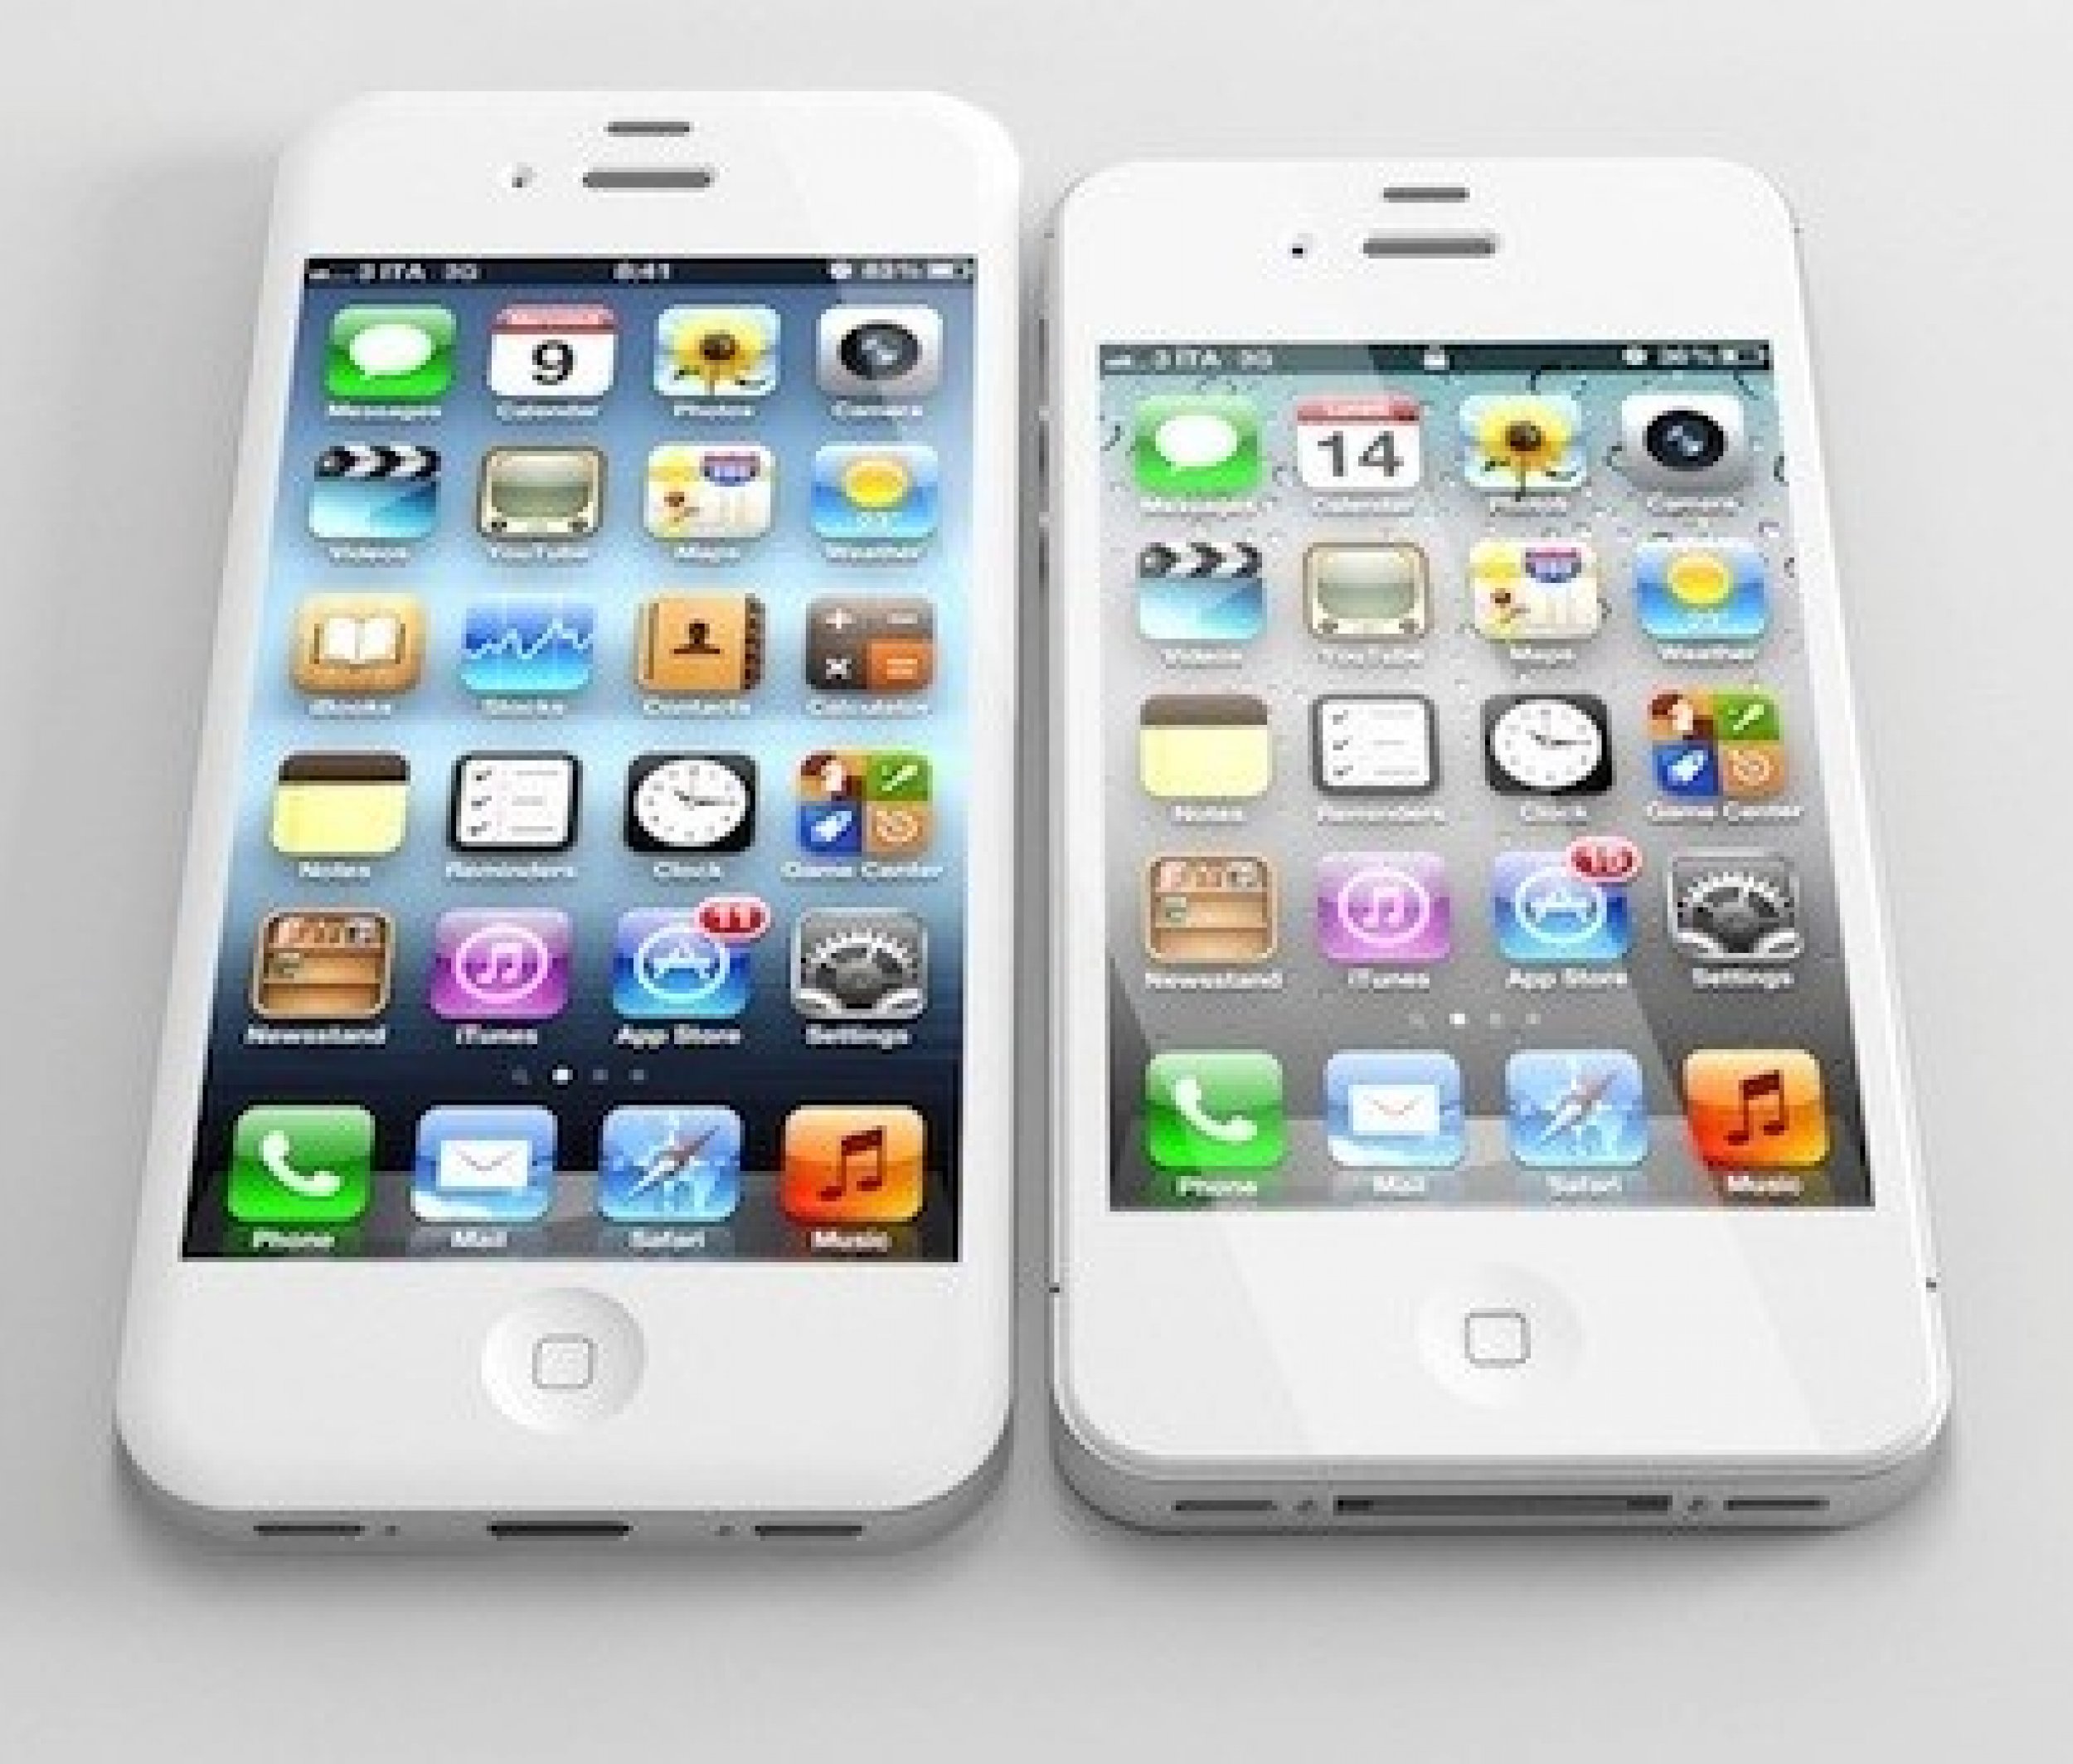 Why Apple Will Release The iPhone 5 With iOS 6 This Fall